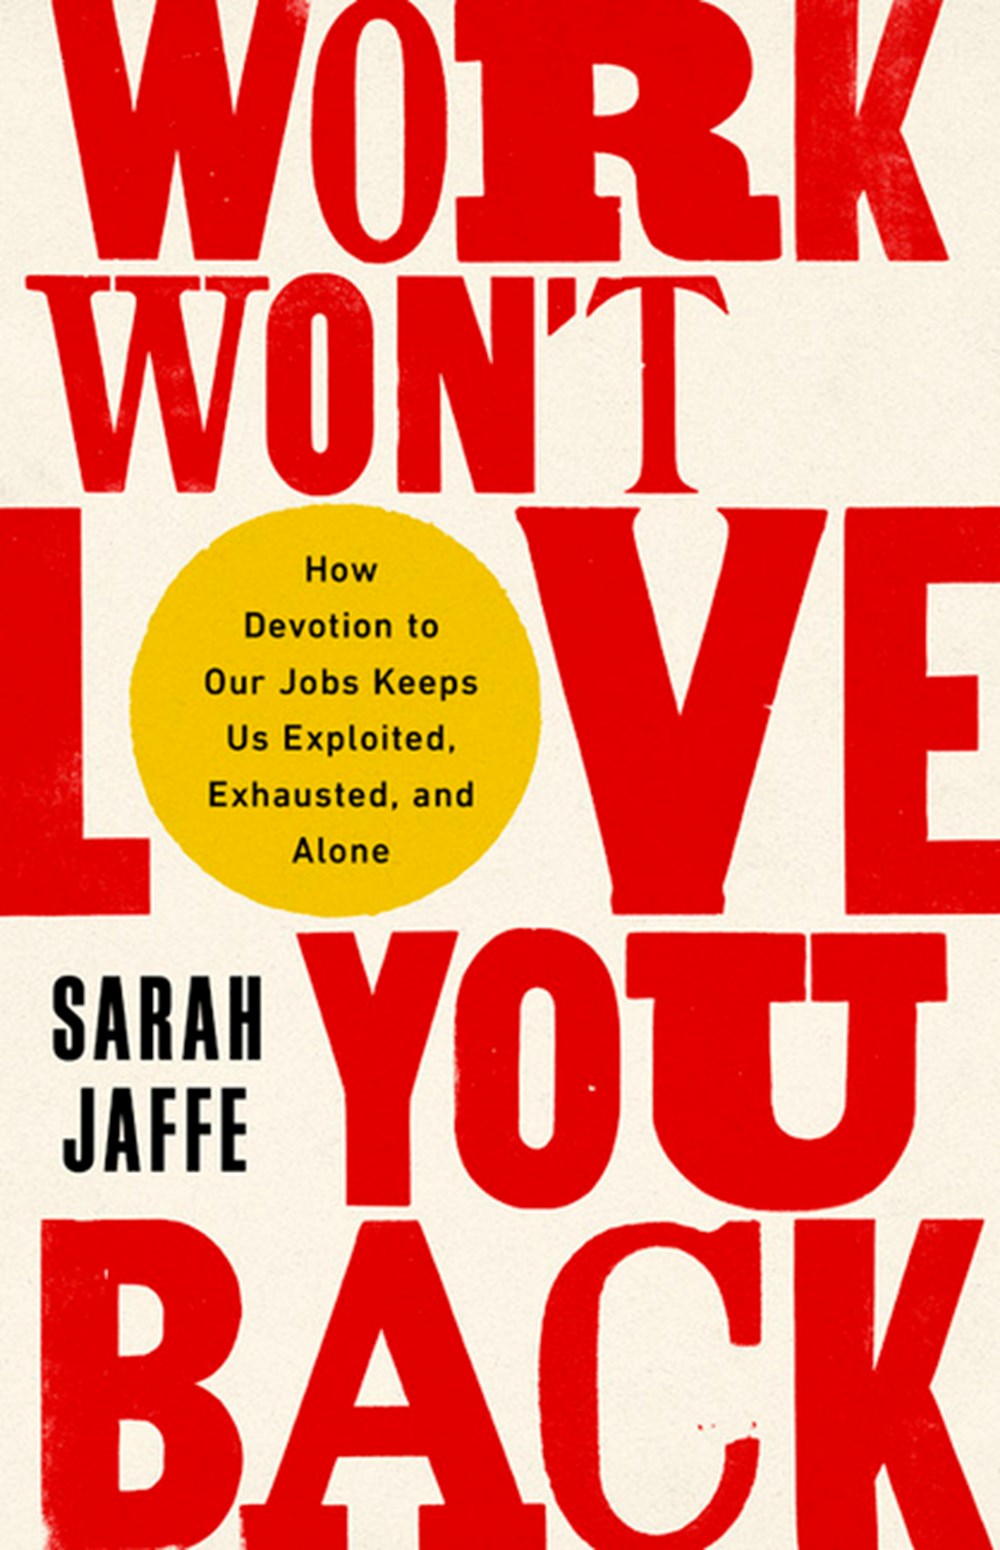 Work Won't Love You Back How Devotion to Our Jobs Keeps Us Exploited, Exhausted, and Alone